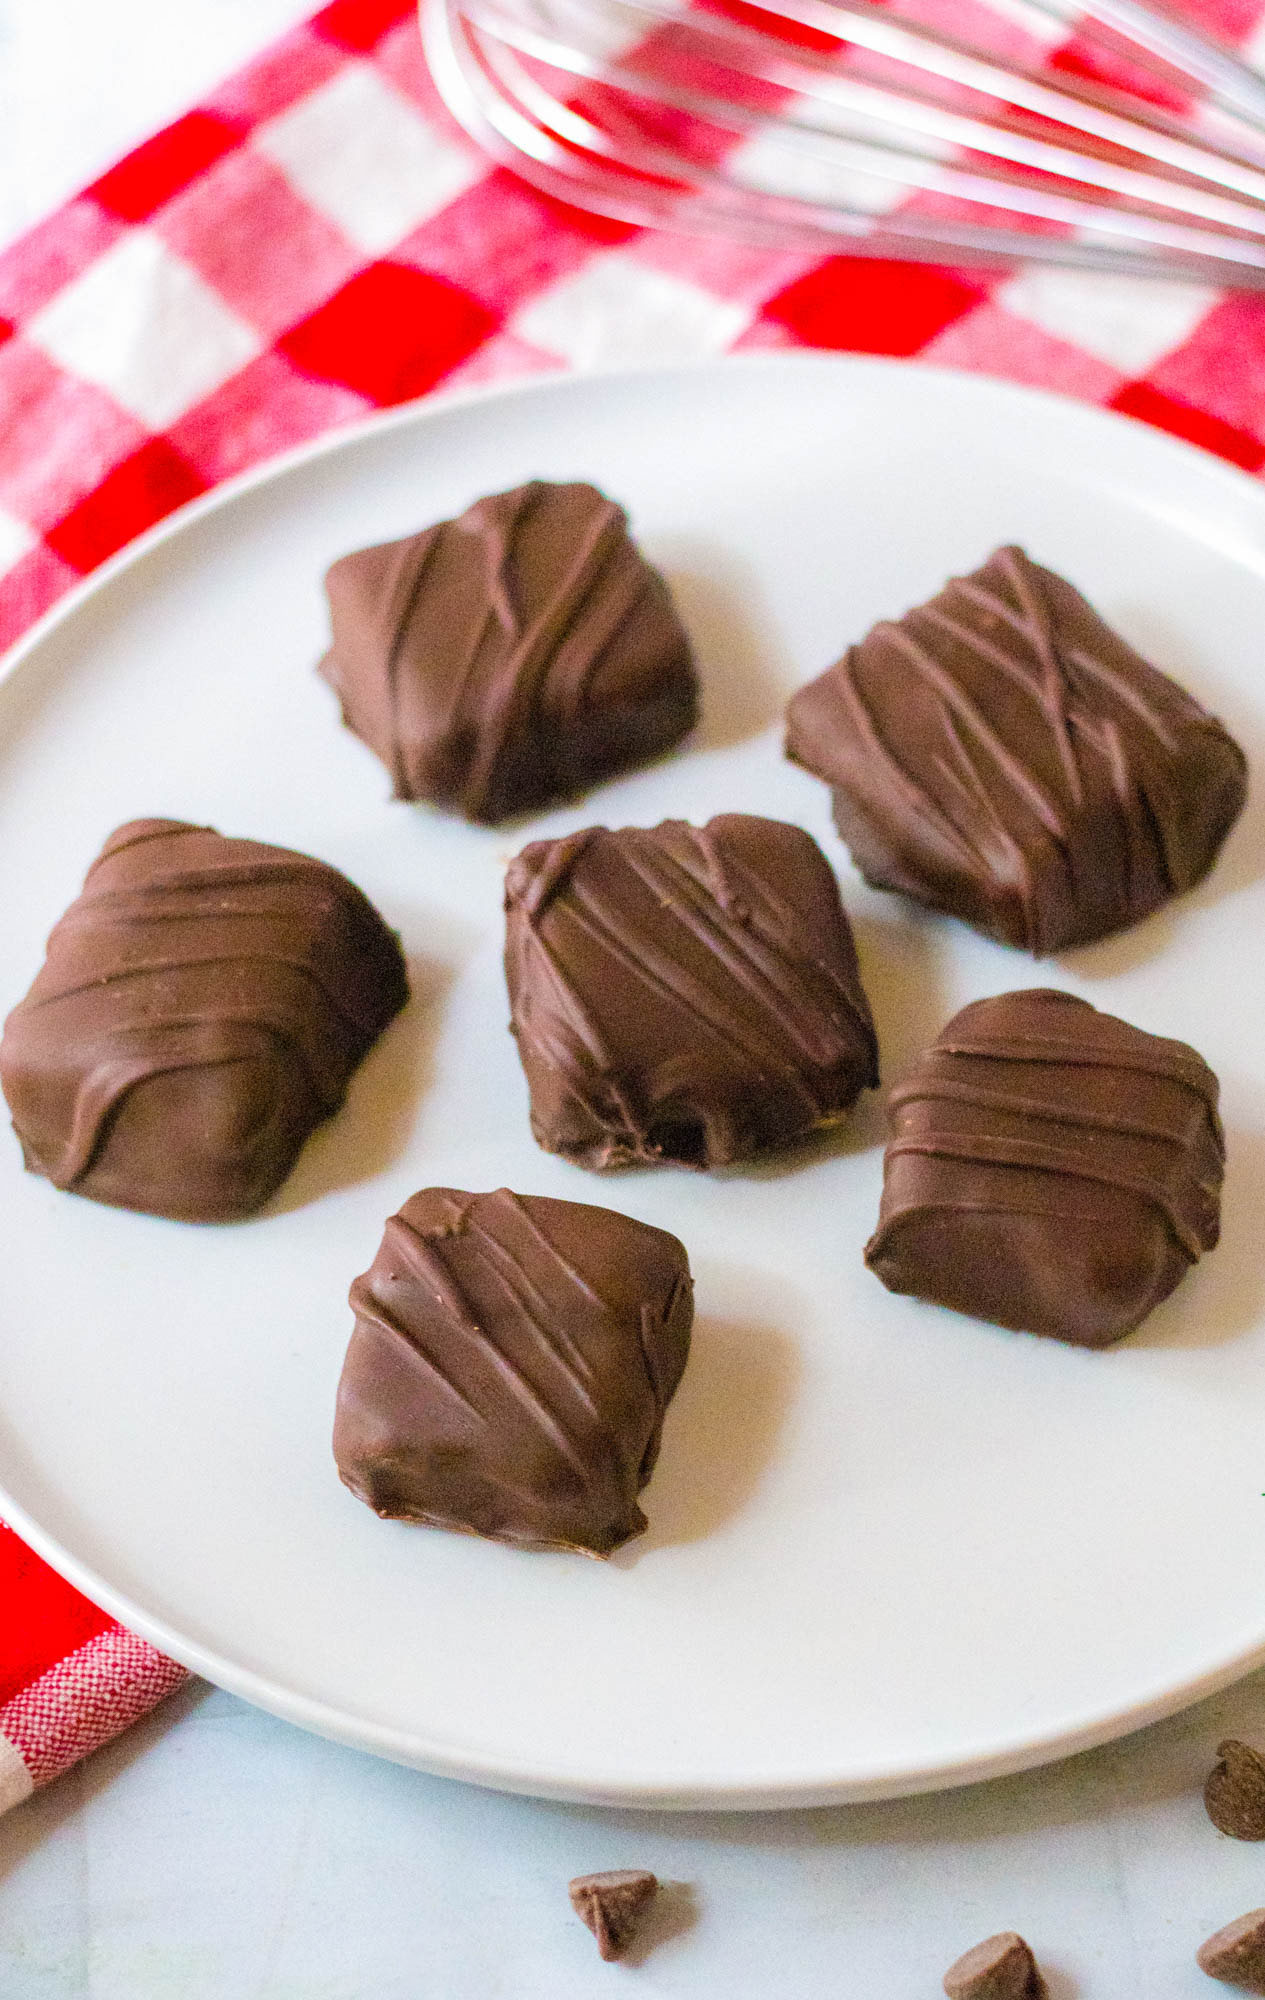 Three Musketeers candy drizzled with melted chocolate served on a white plate. 